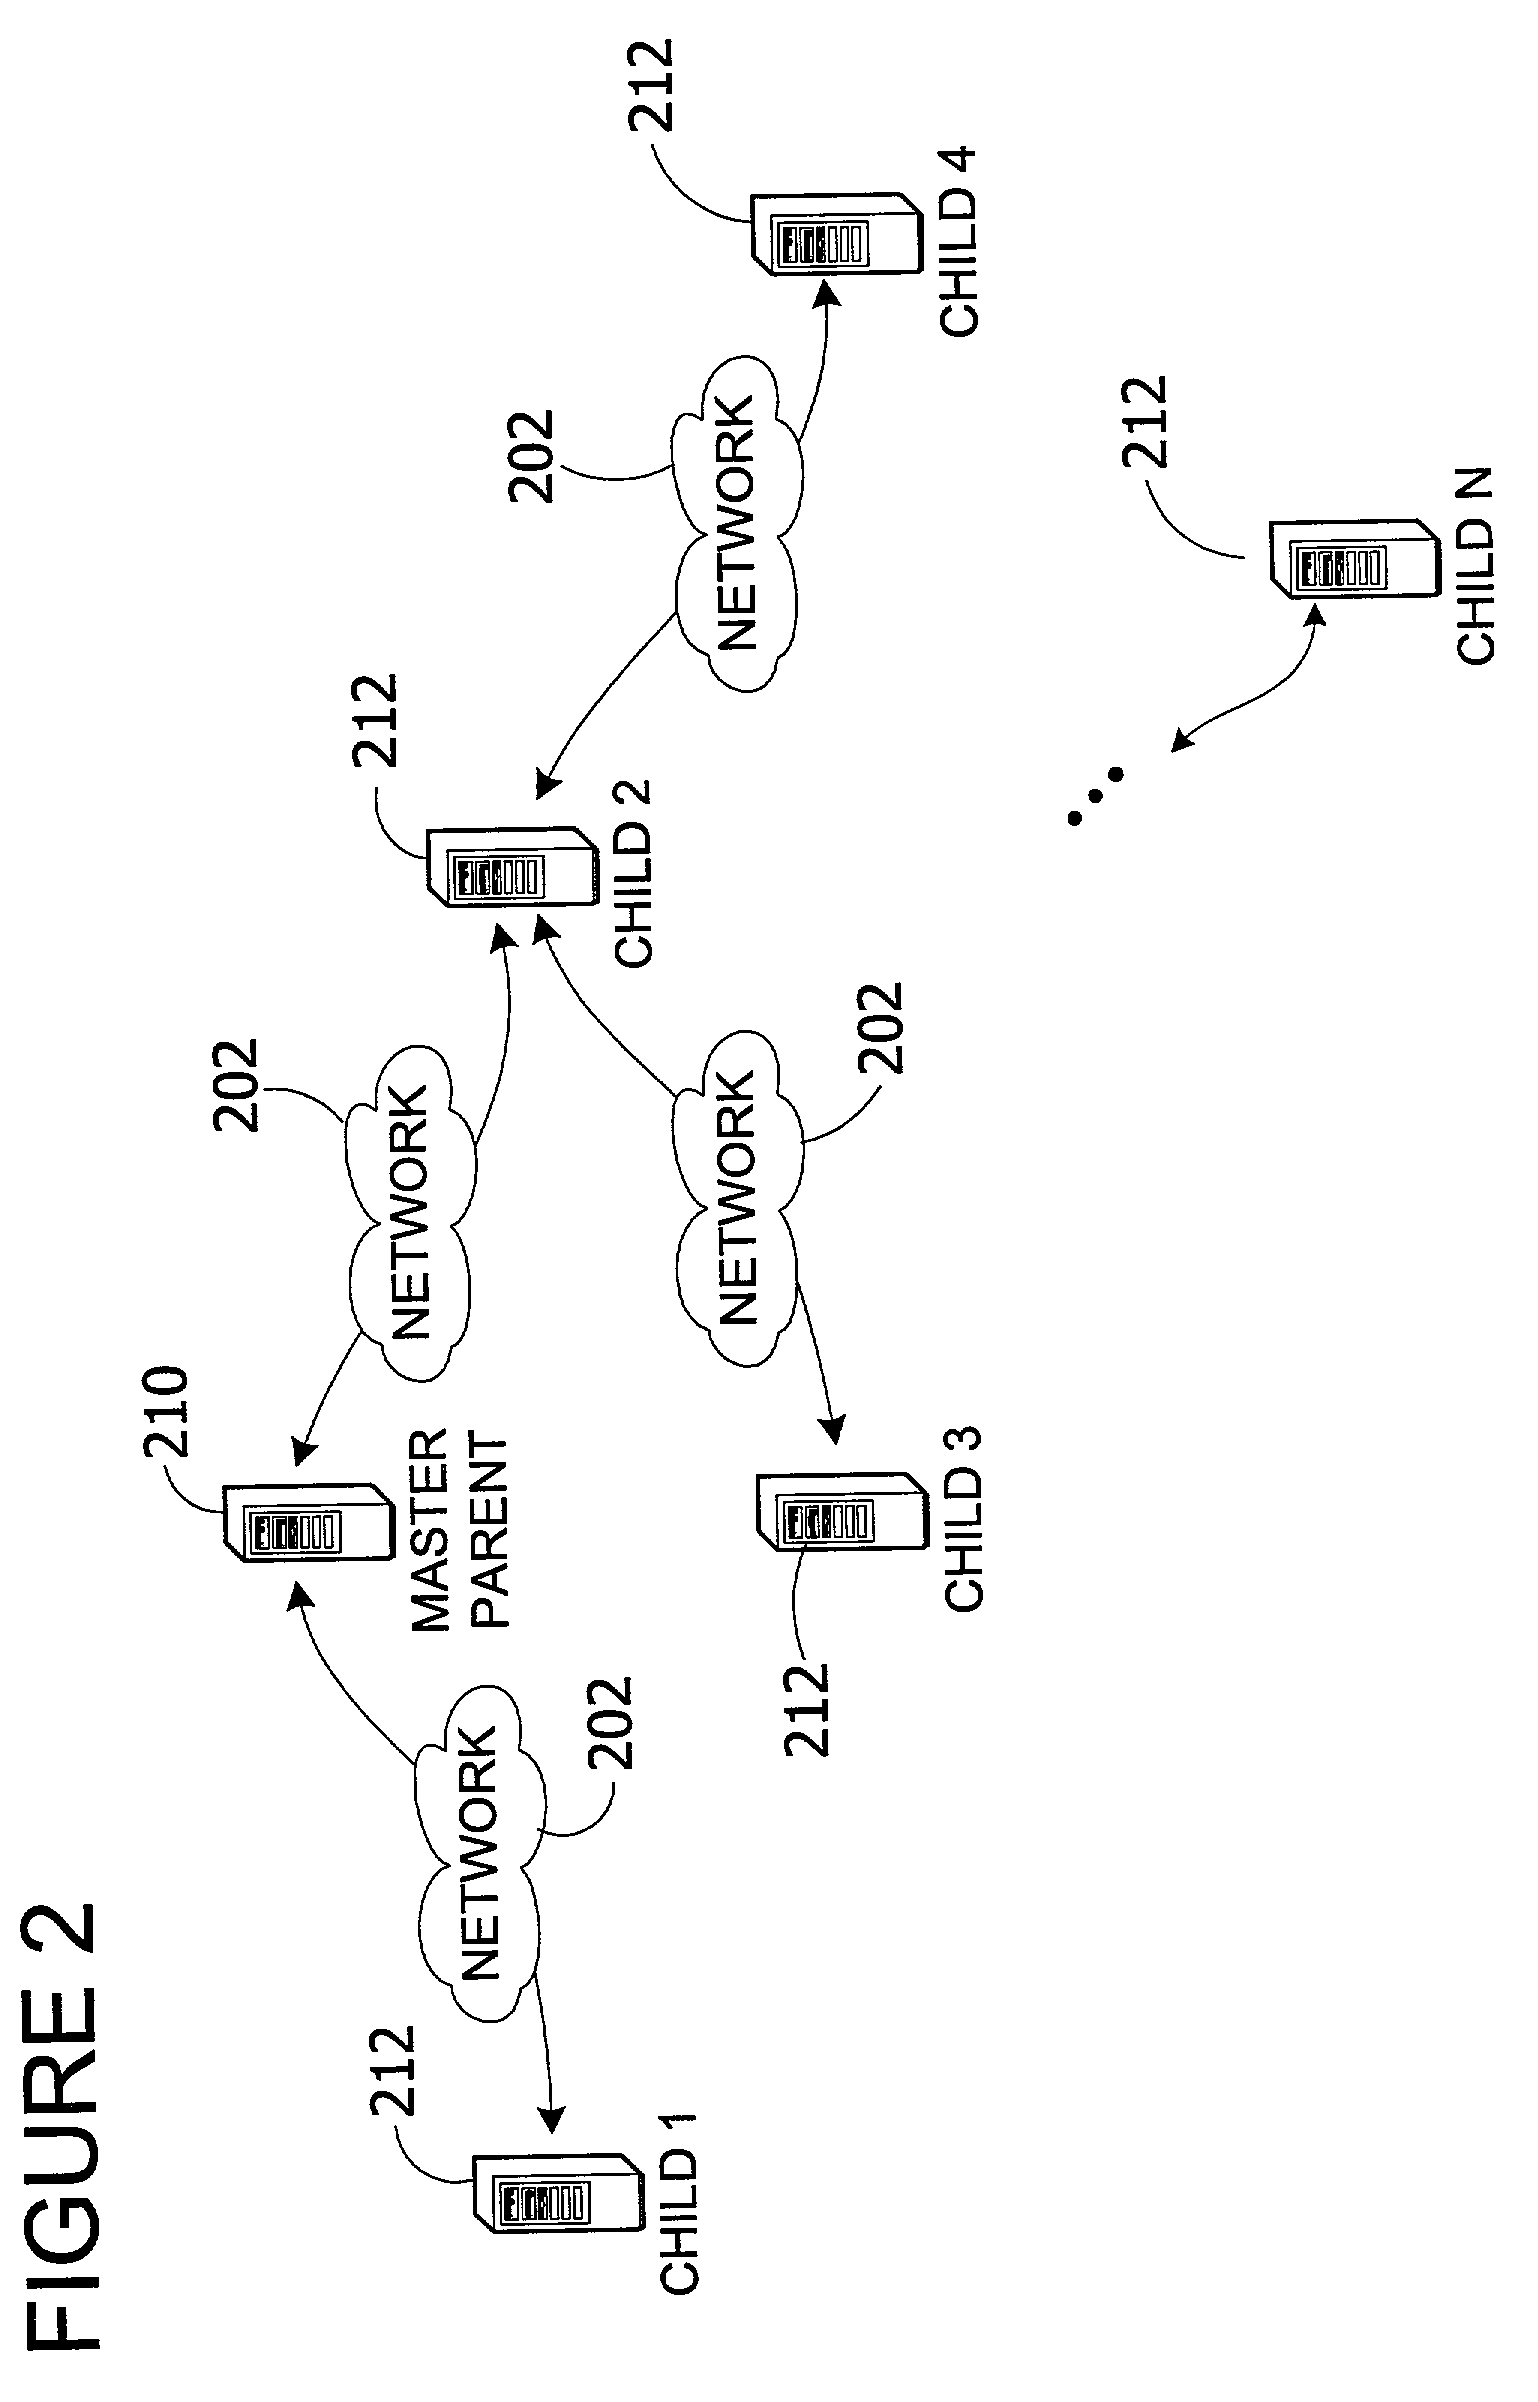 Distributed variable synchronizer